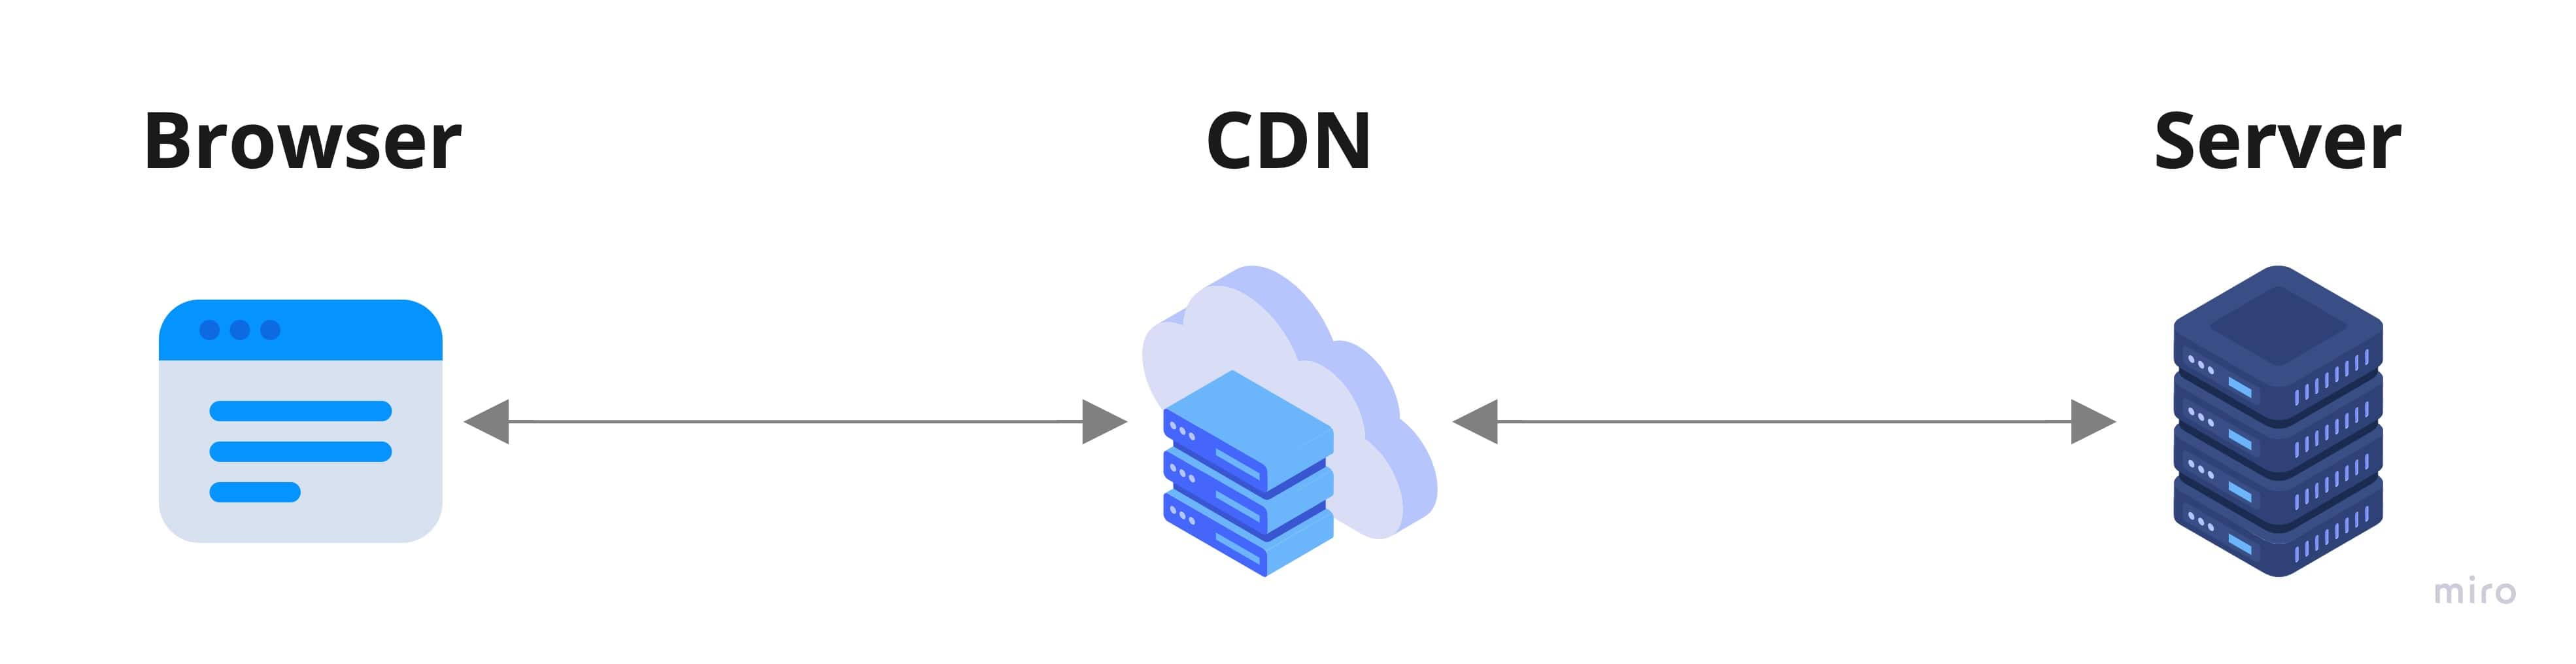 Diagram with Browser, CDN and Server actors